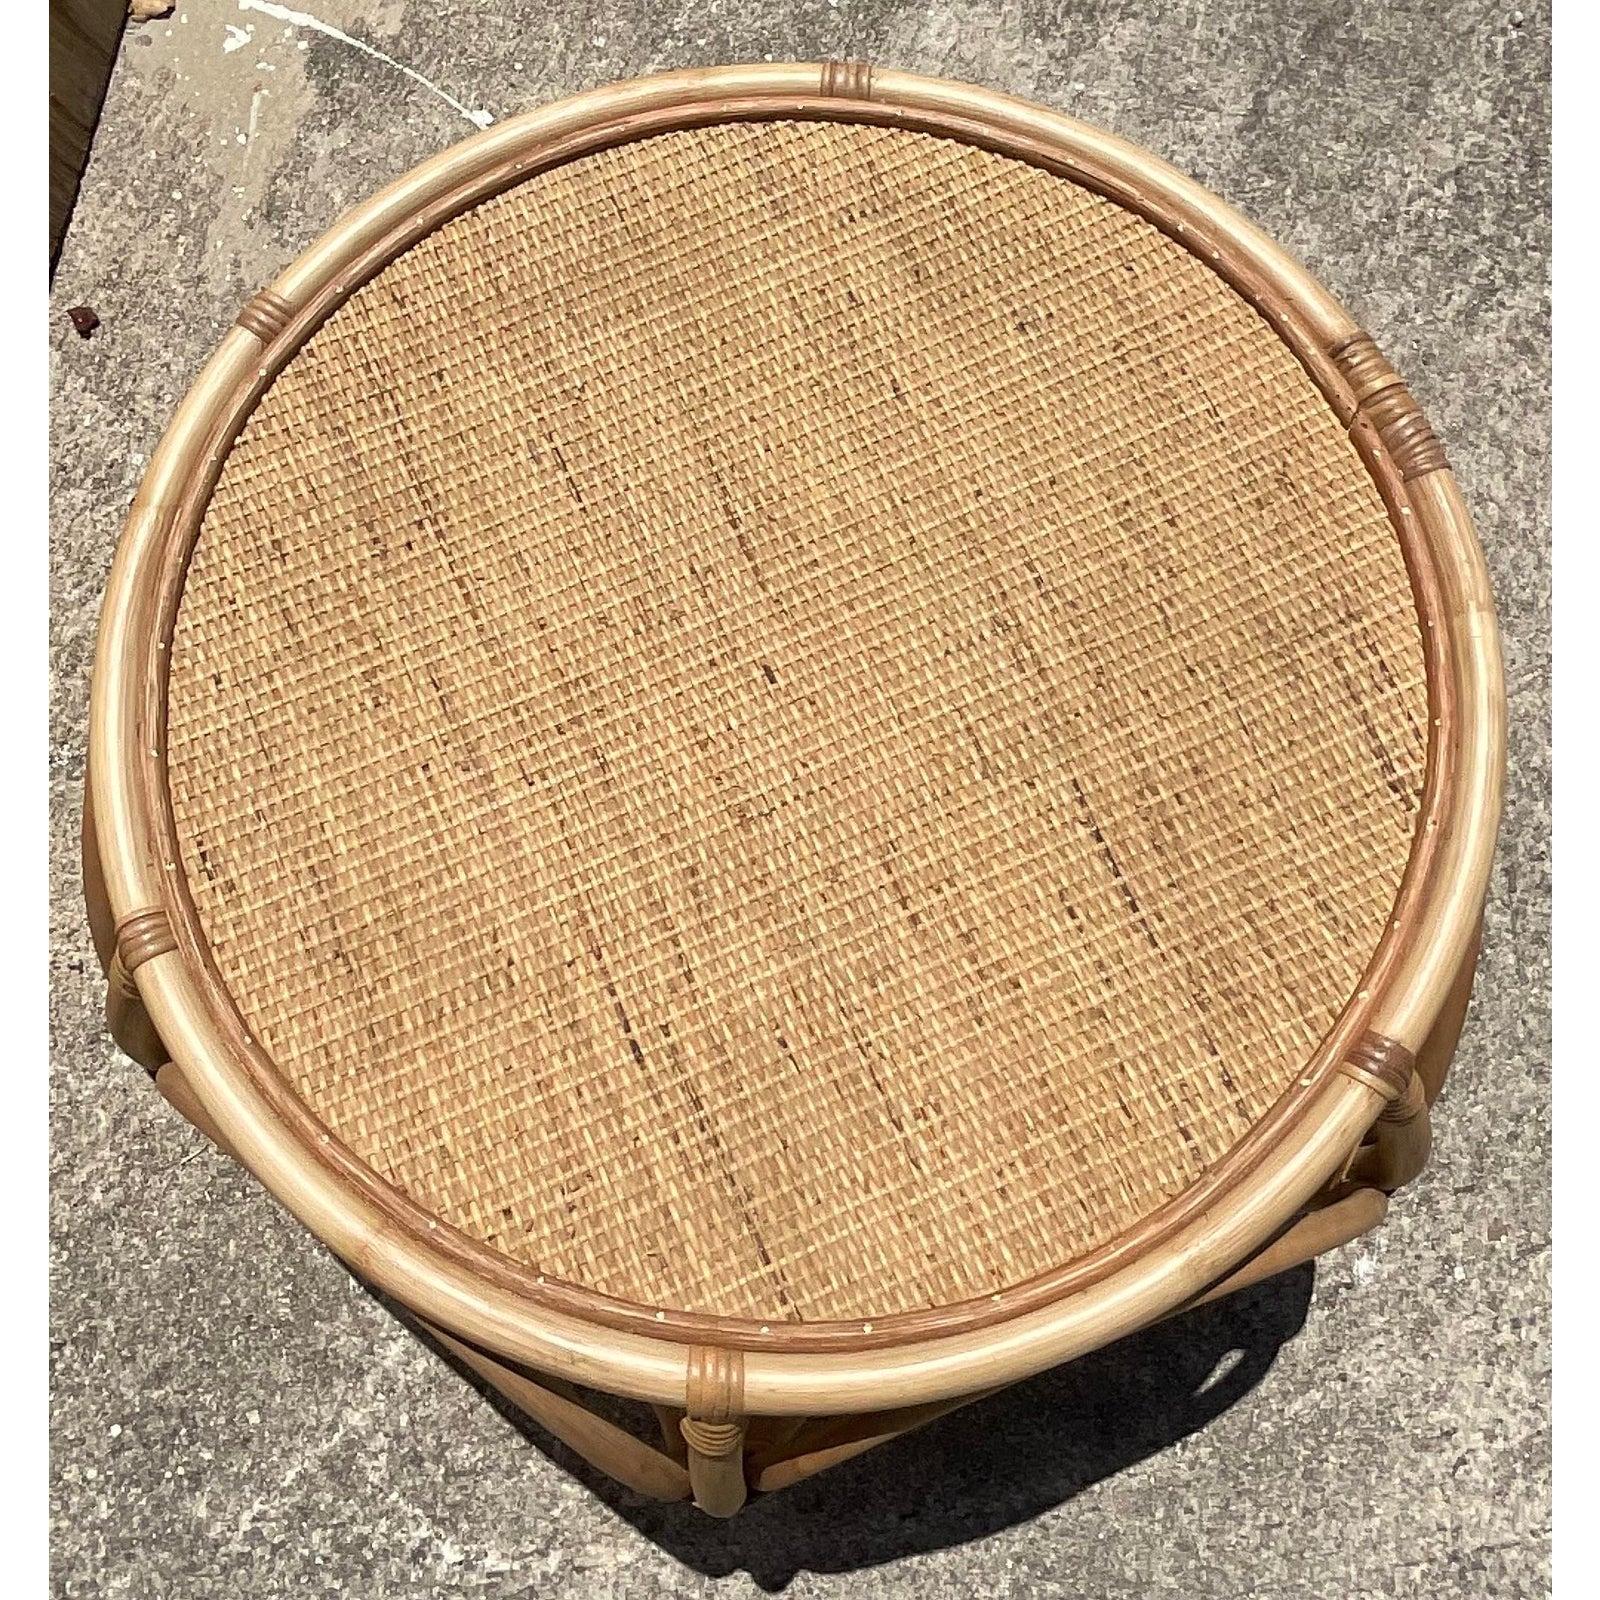 A gorgeous Coastal rattan coffee table. A beautiful design with bent rattan in big loops with a chic woven rattan top. Perfect for indoors or out. Acquired from a Miami estate.